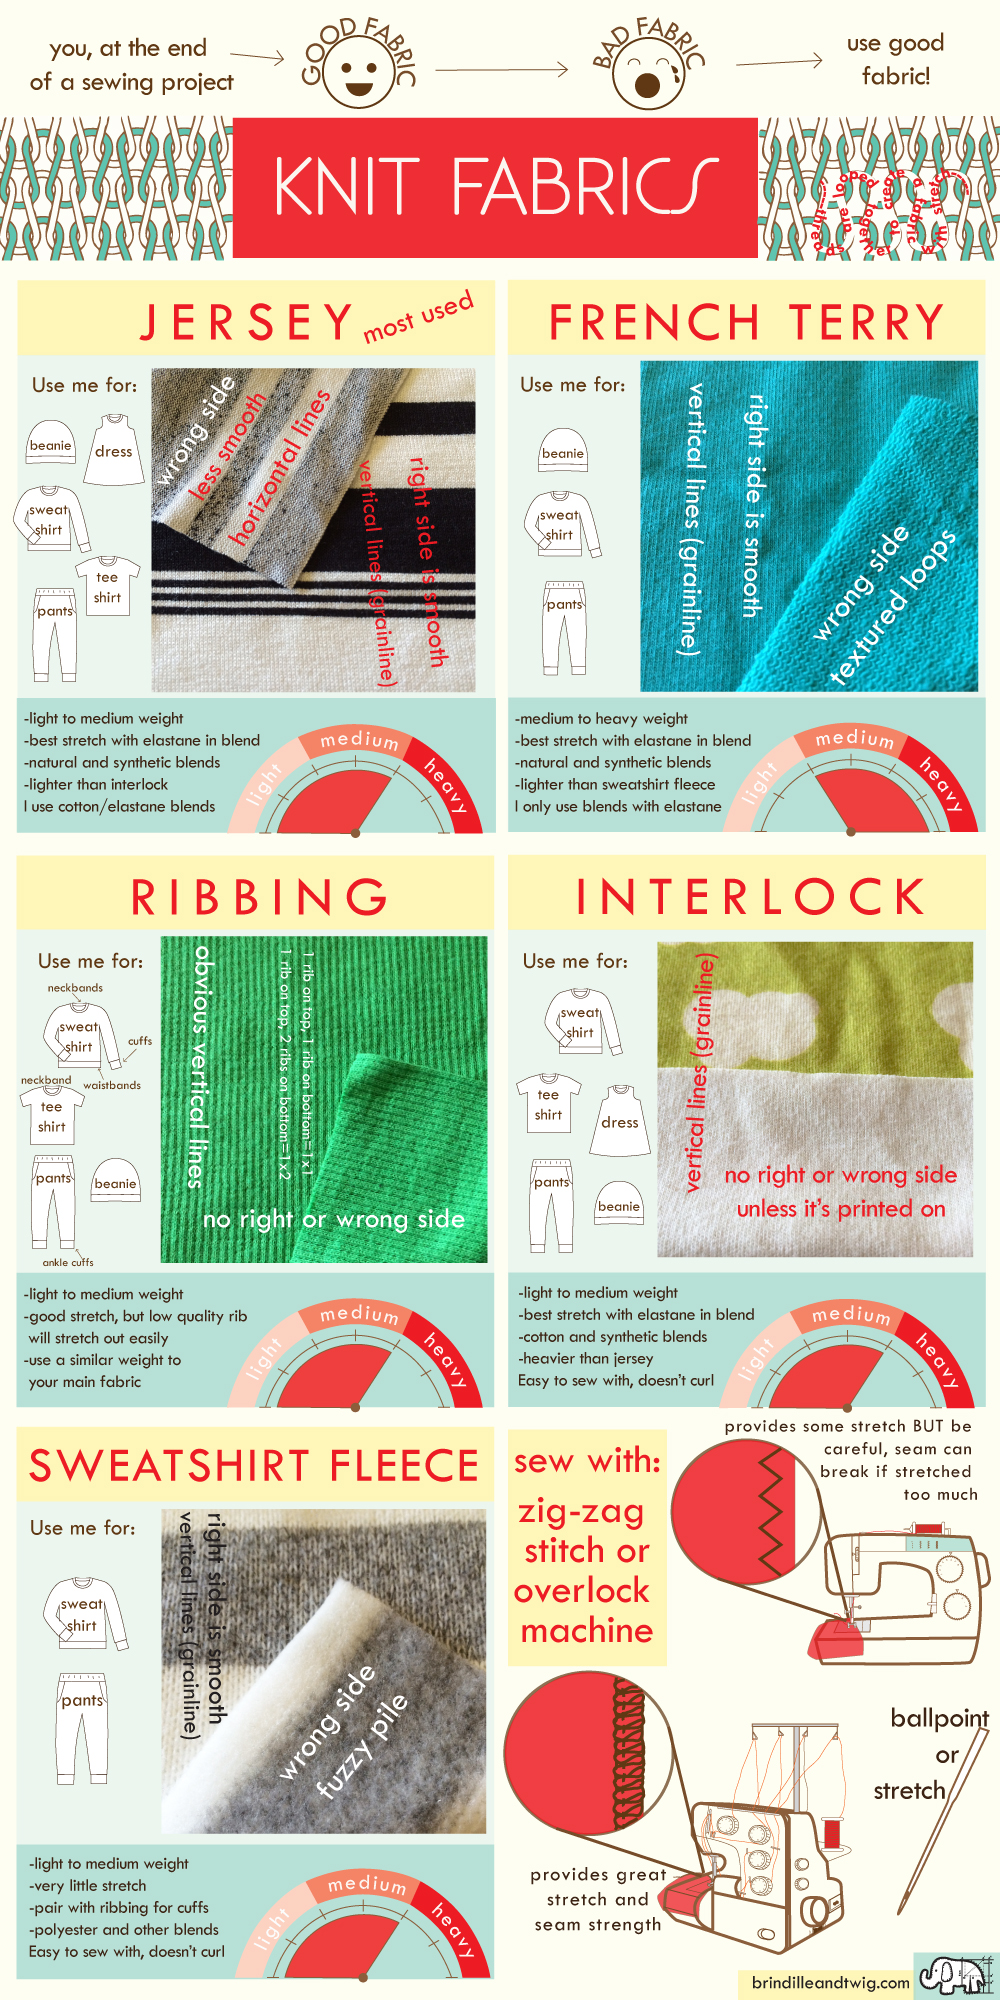 Quick overlook of the commonly used knit fabrics